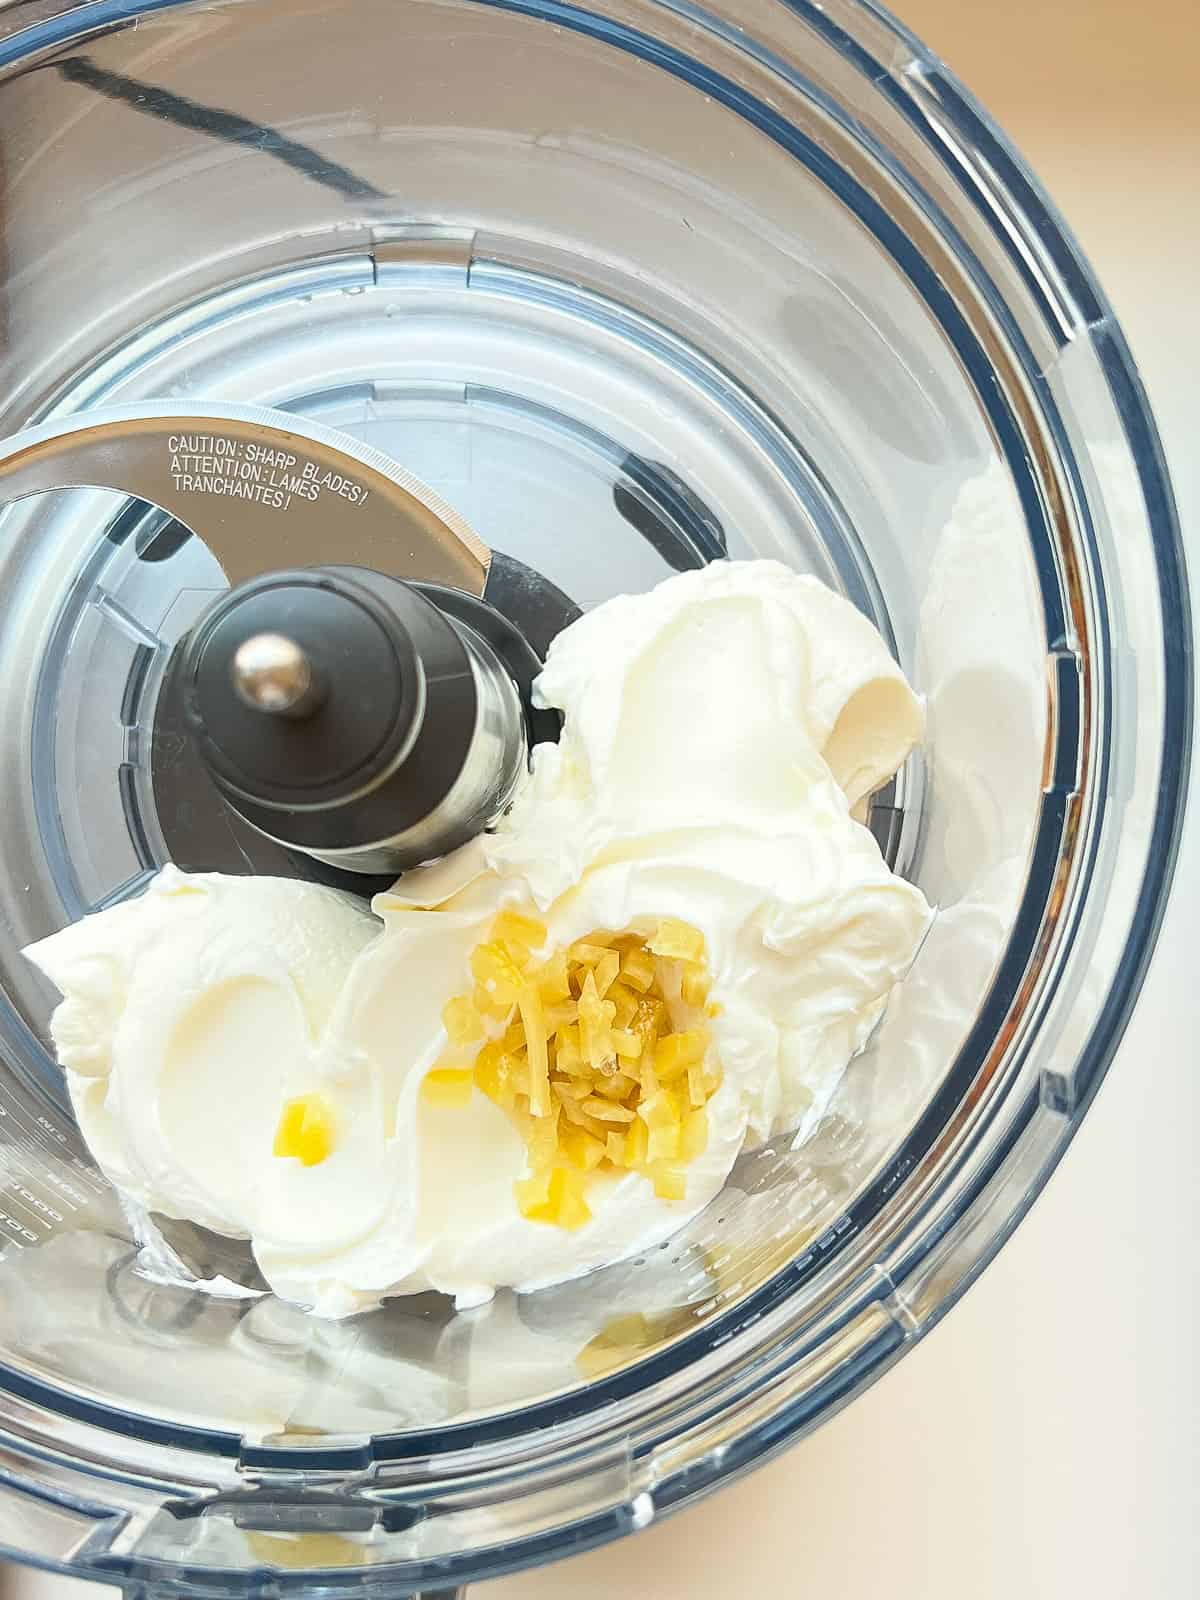 An image of preserved lemon and labneh in the bowl of a food processor.